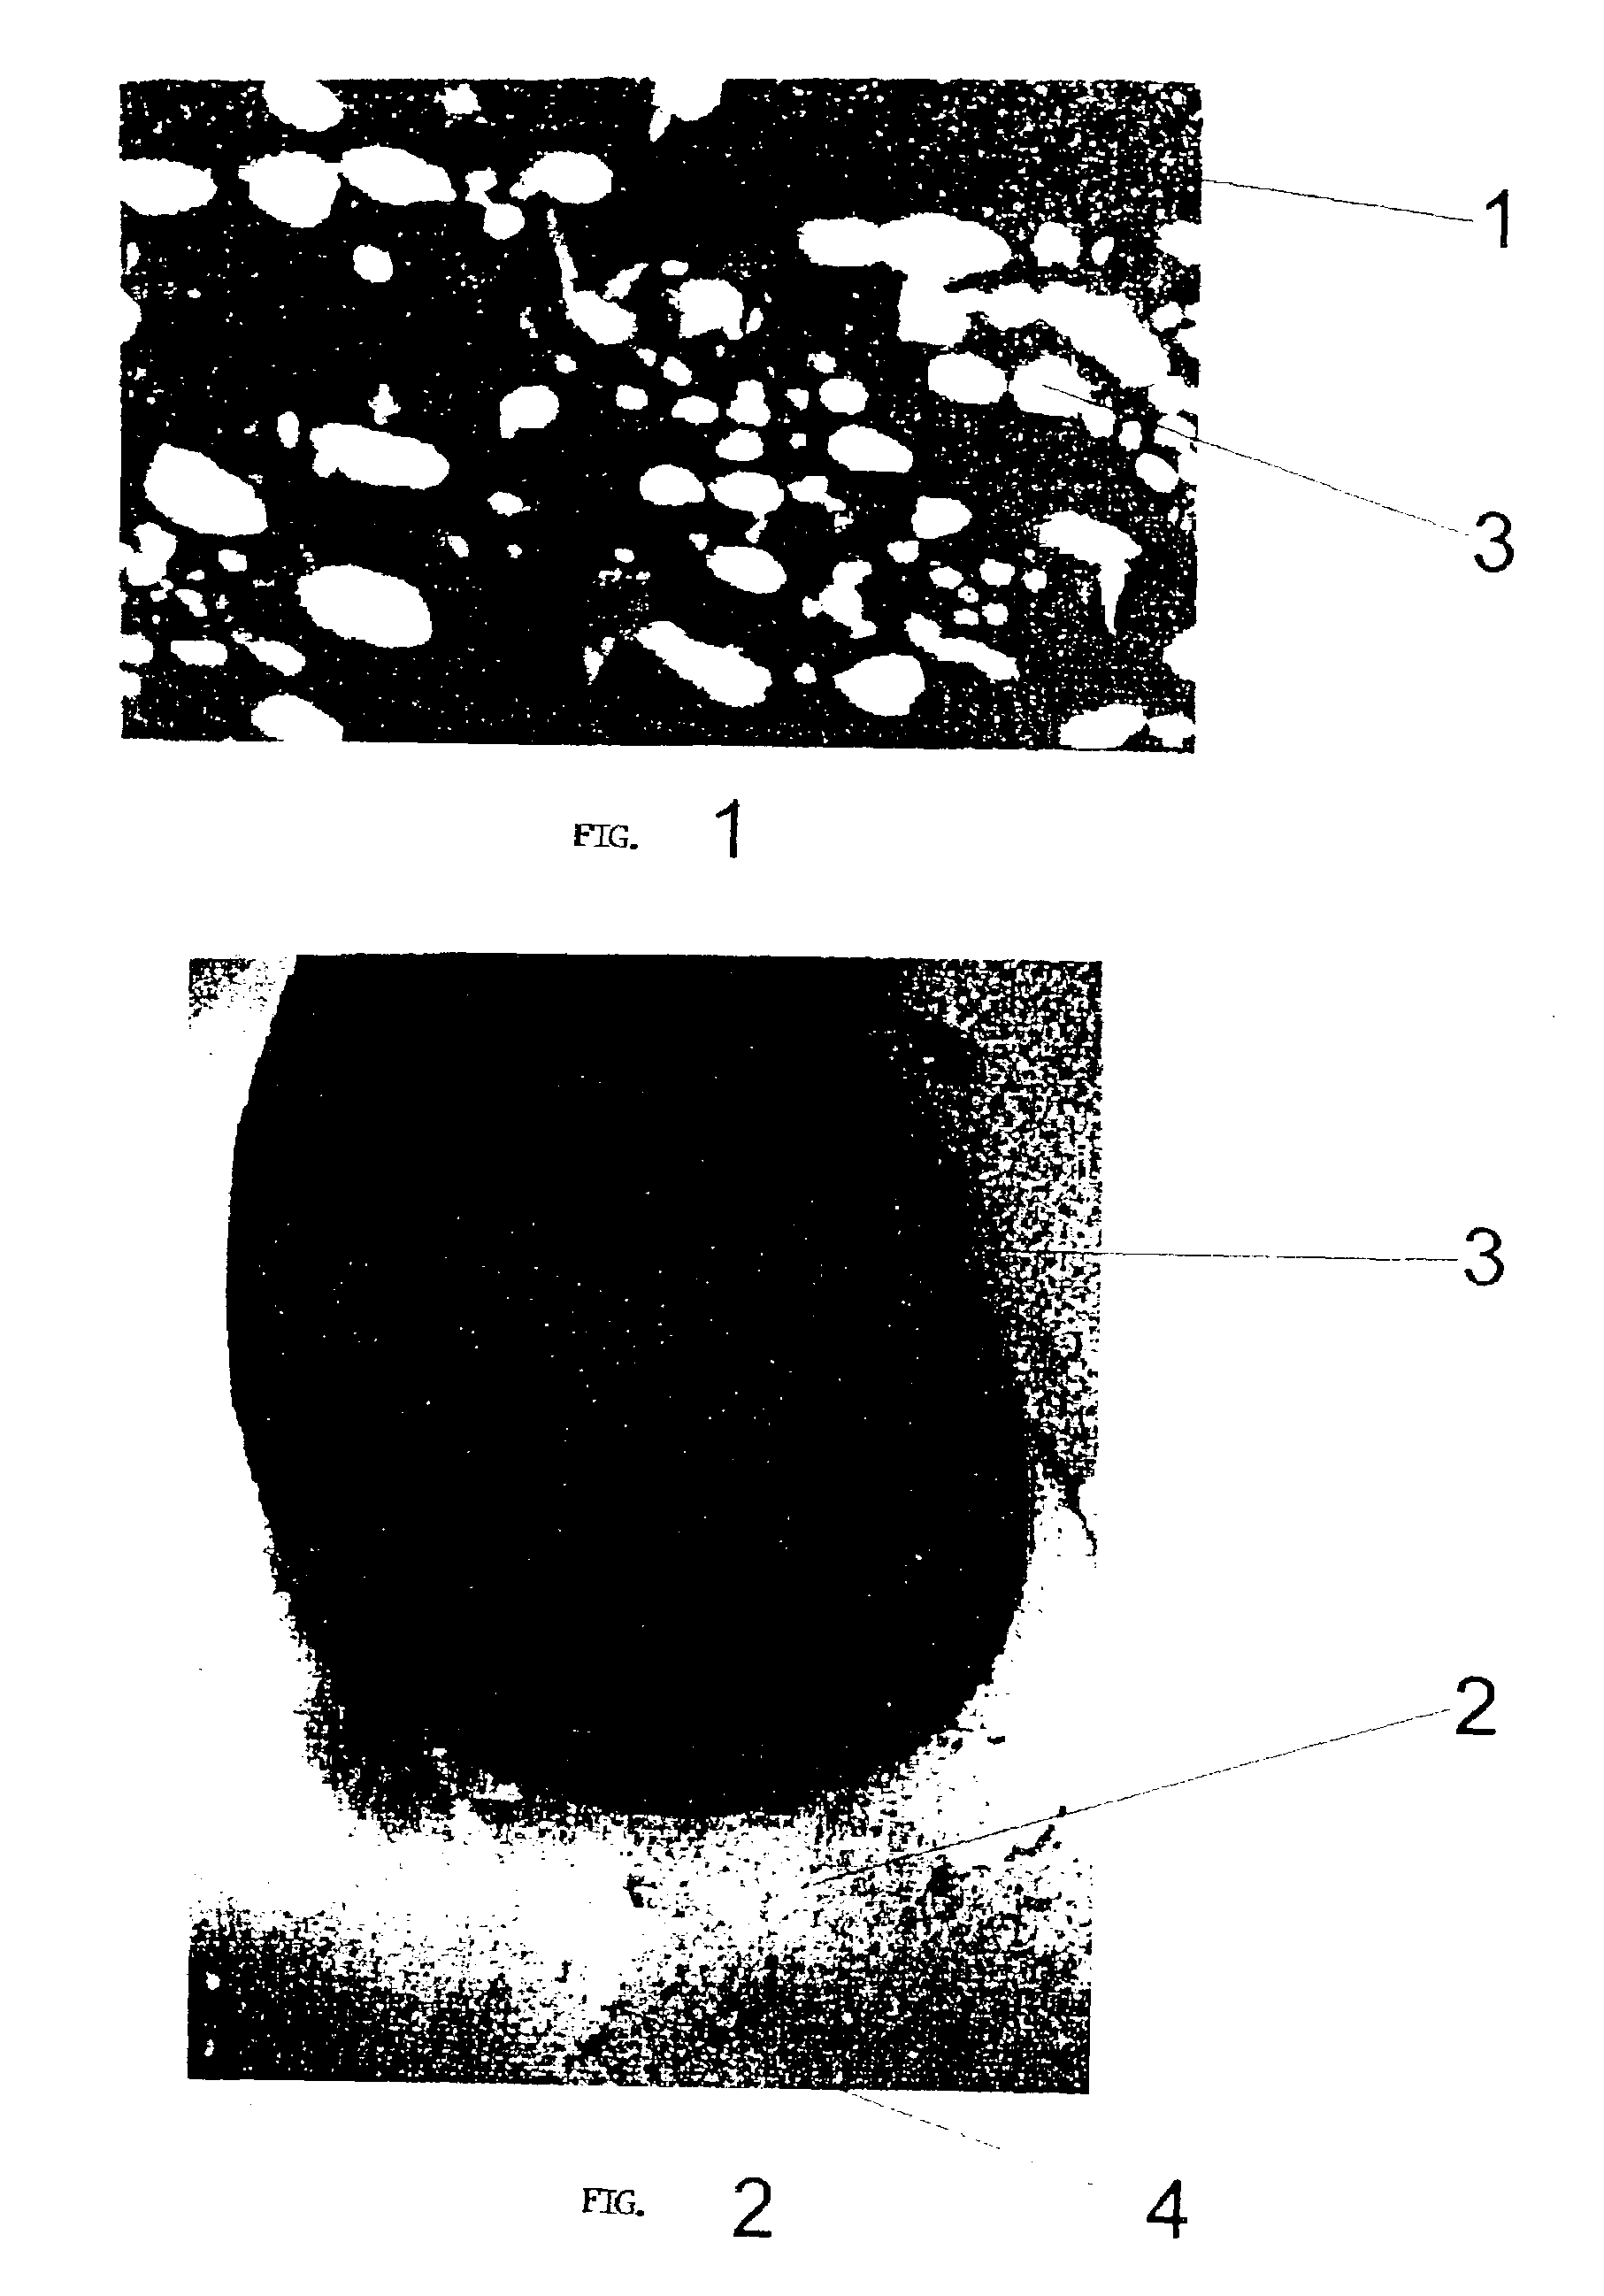 Aluminum-based material and a method for manufacturing products from aluminum-based material